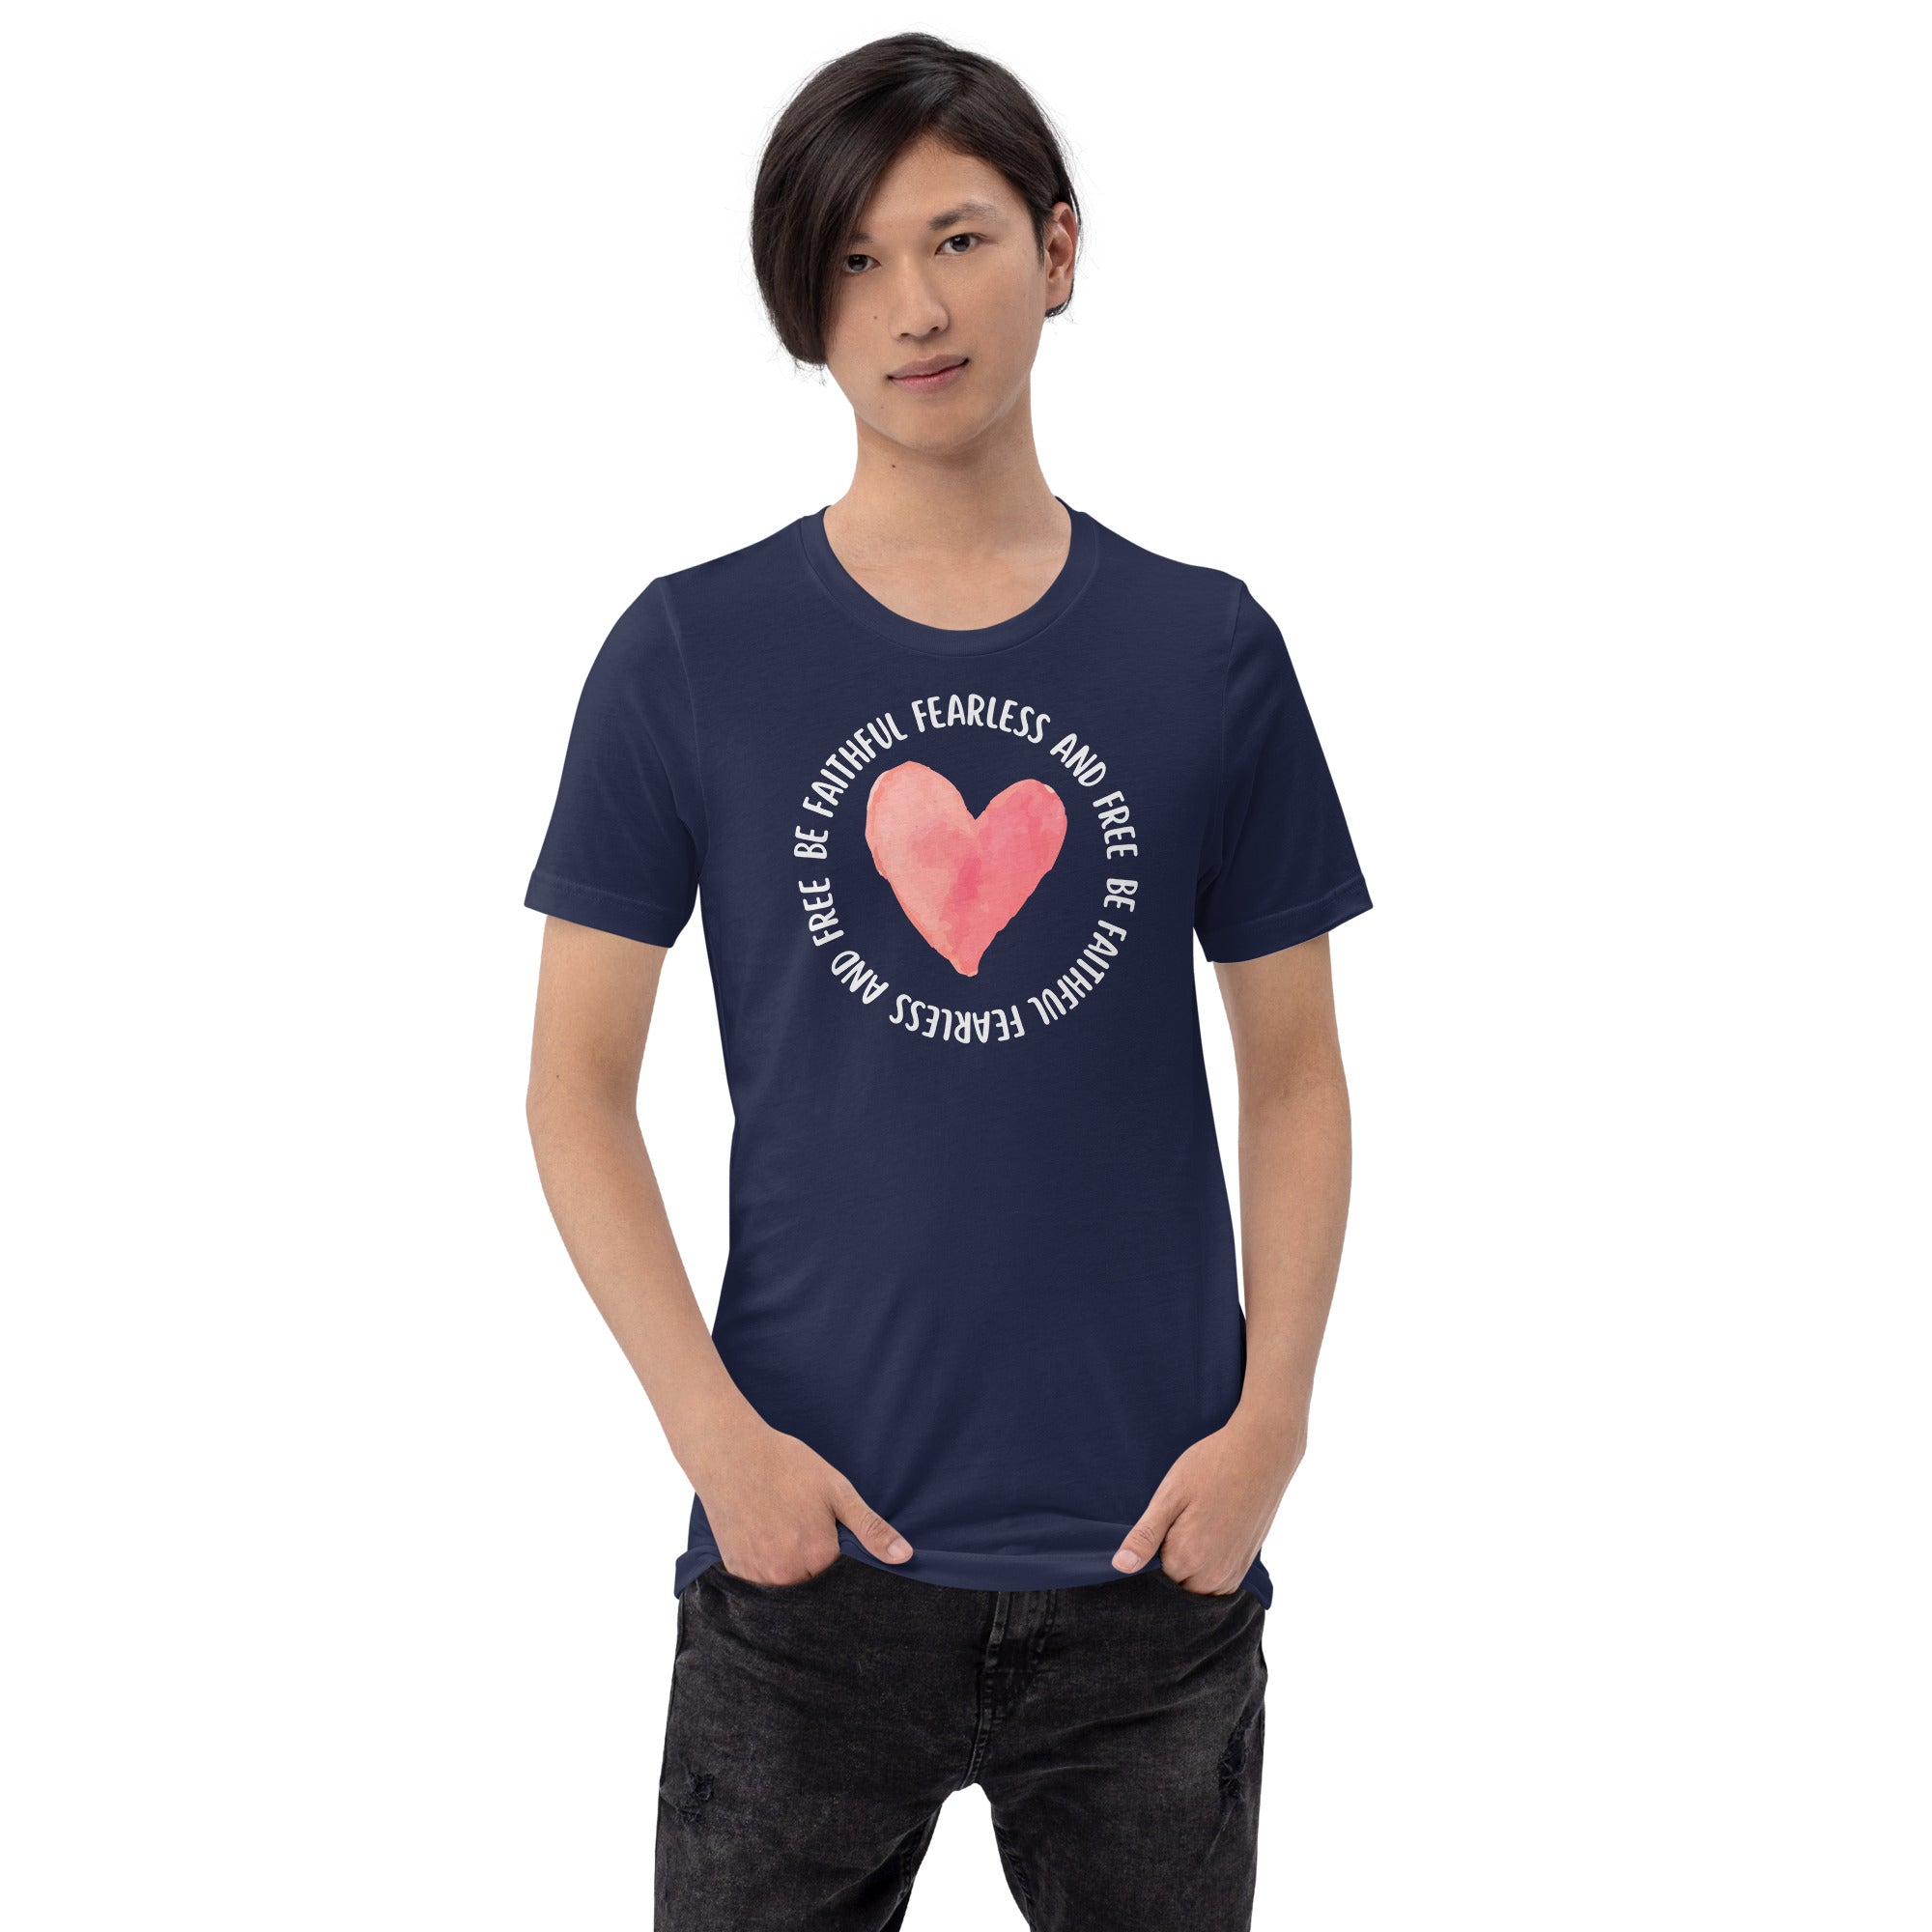 Be Faithful Fearless And Free Unisex t-shirt